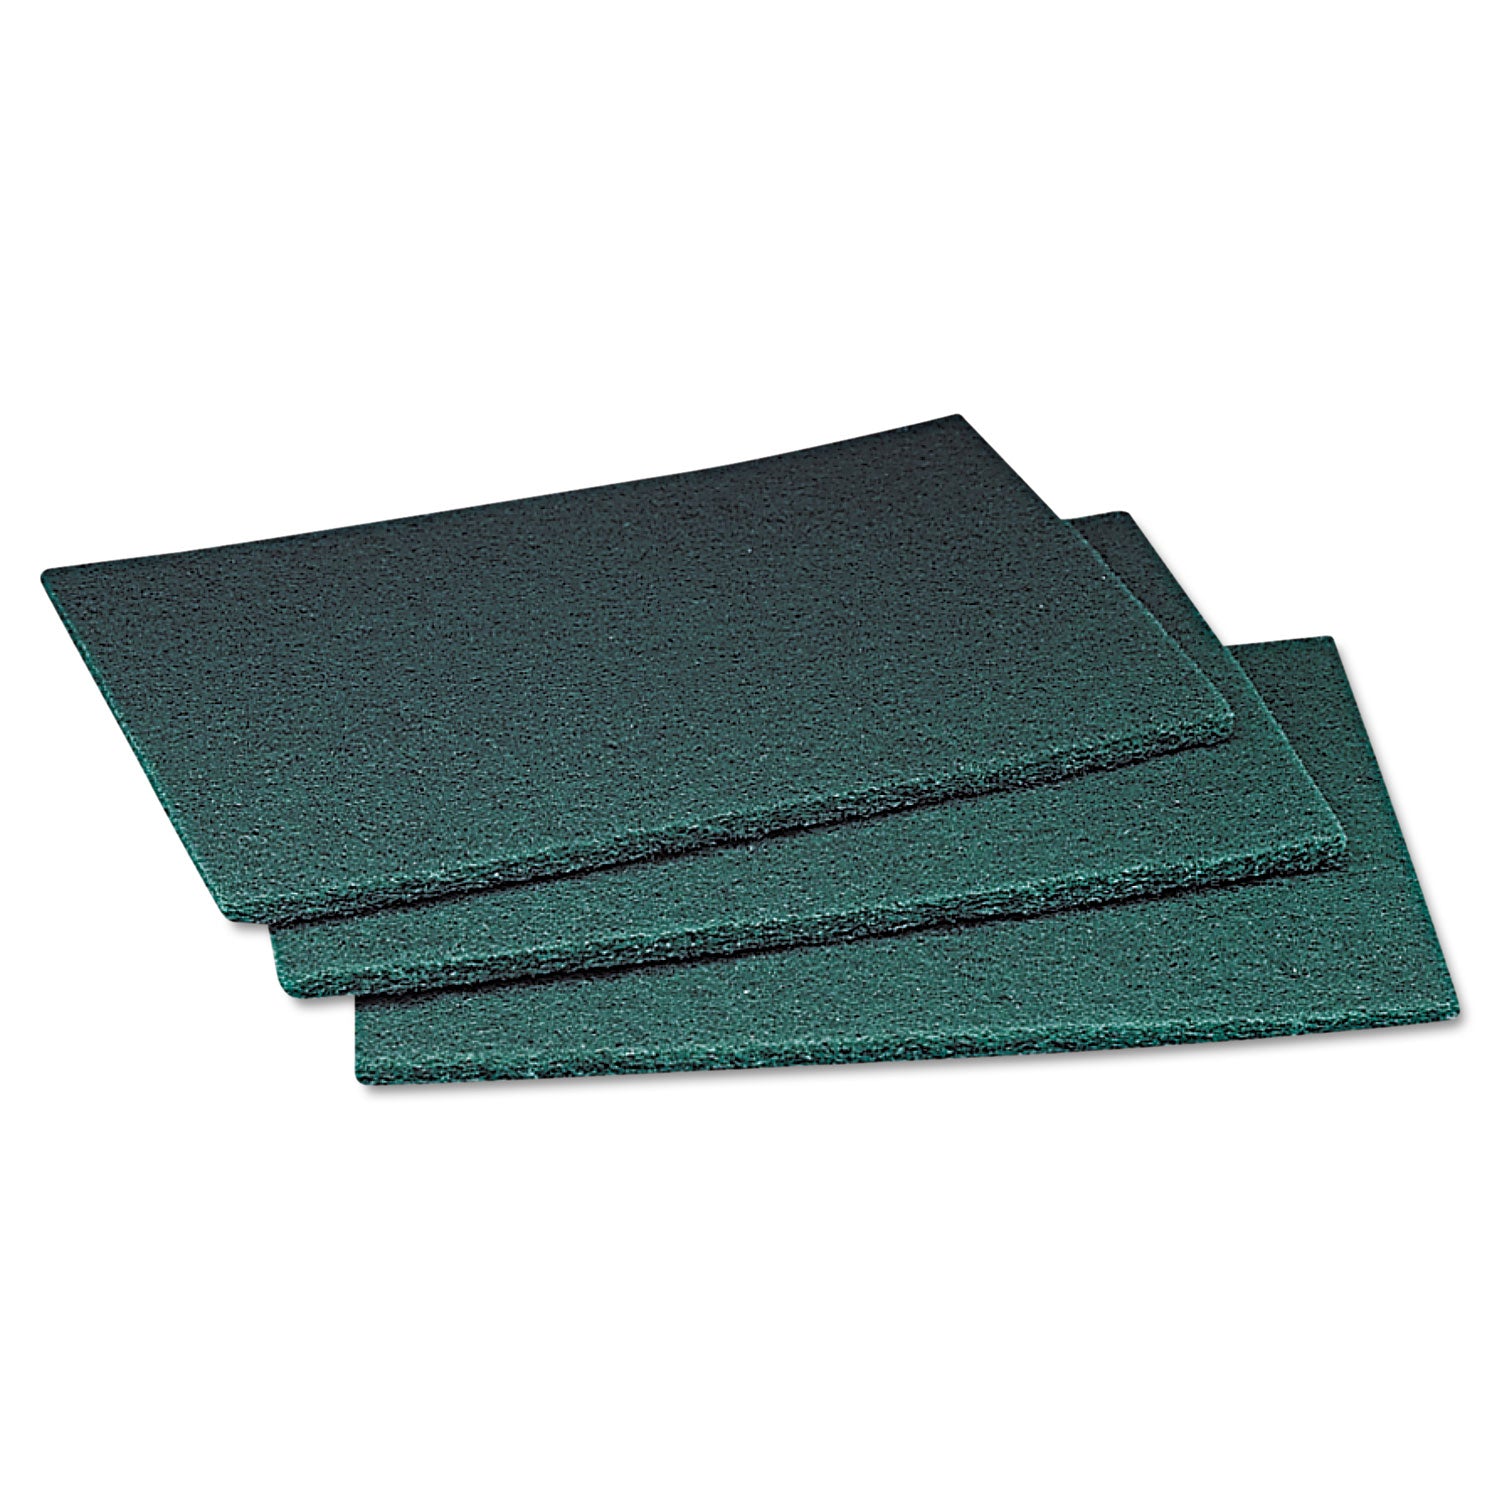 Commercial Scouring Pad, 6 x 9, Green, 20 Pads/Box, 3 Boxes/Carton - 